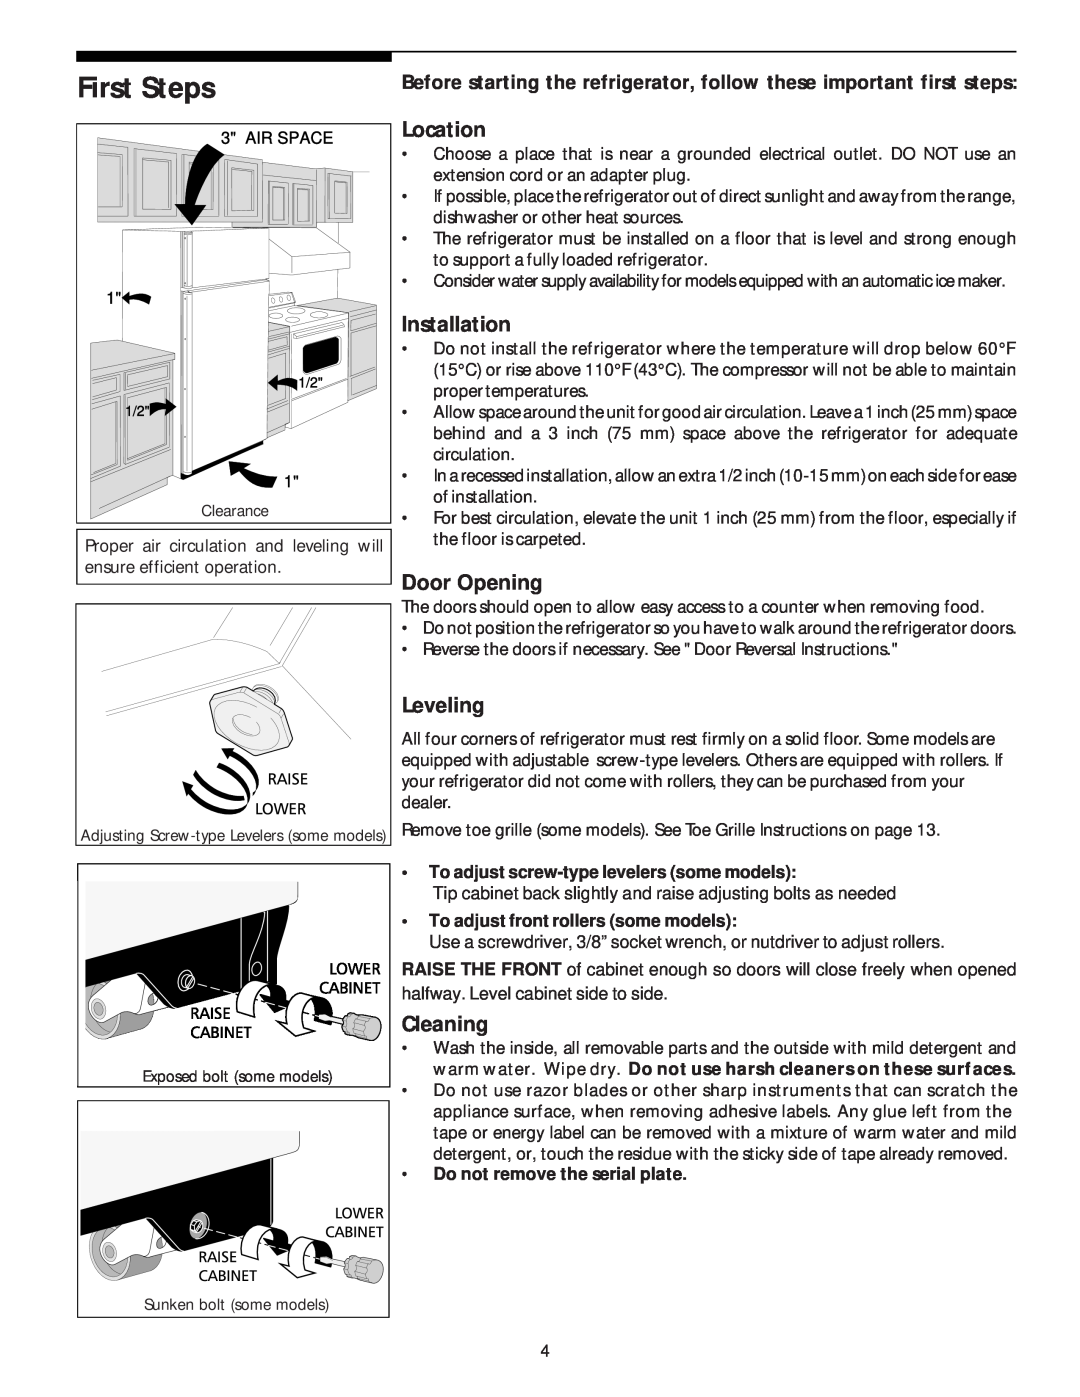 White-Westinghouse Top Freezer manual First Steps, Location, Installation, Door Opening, Leveling, Cleaning 